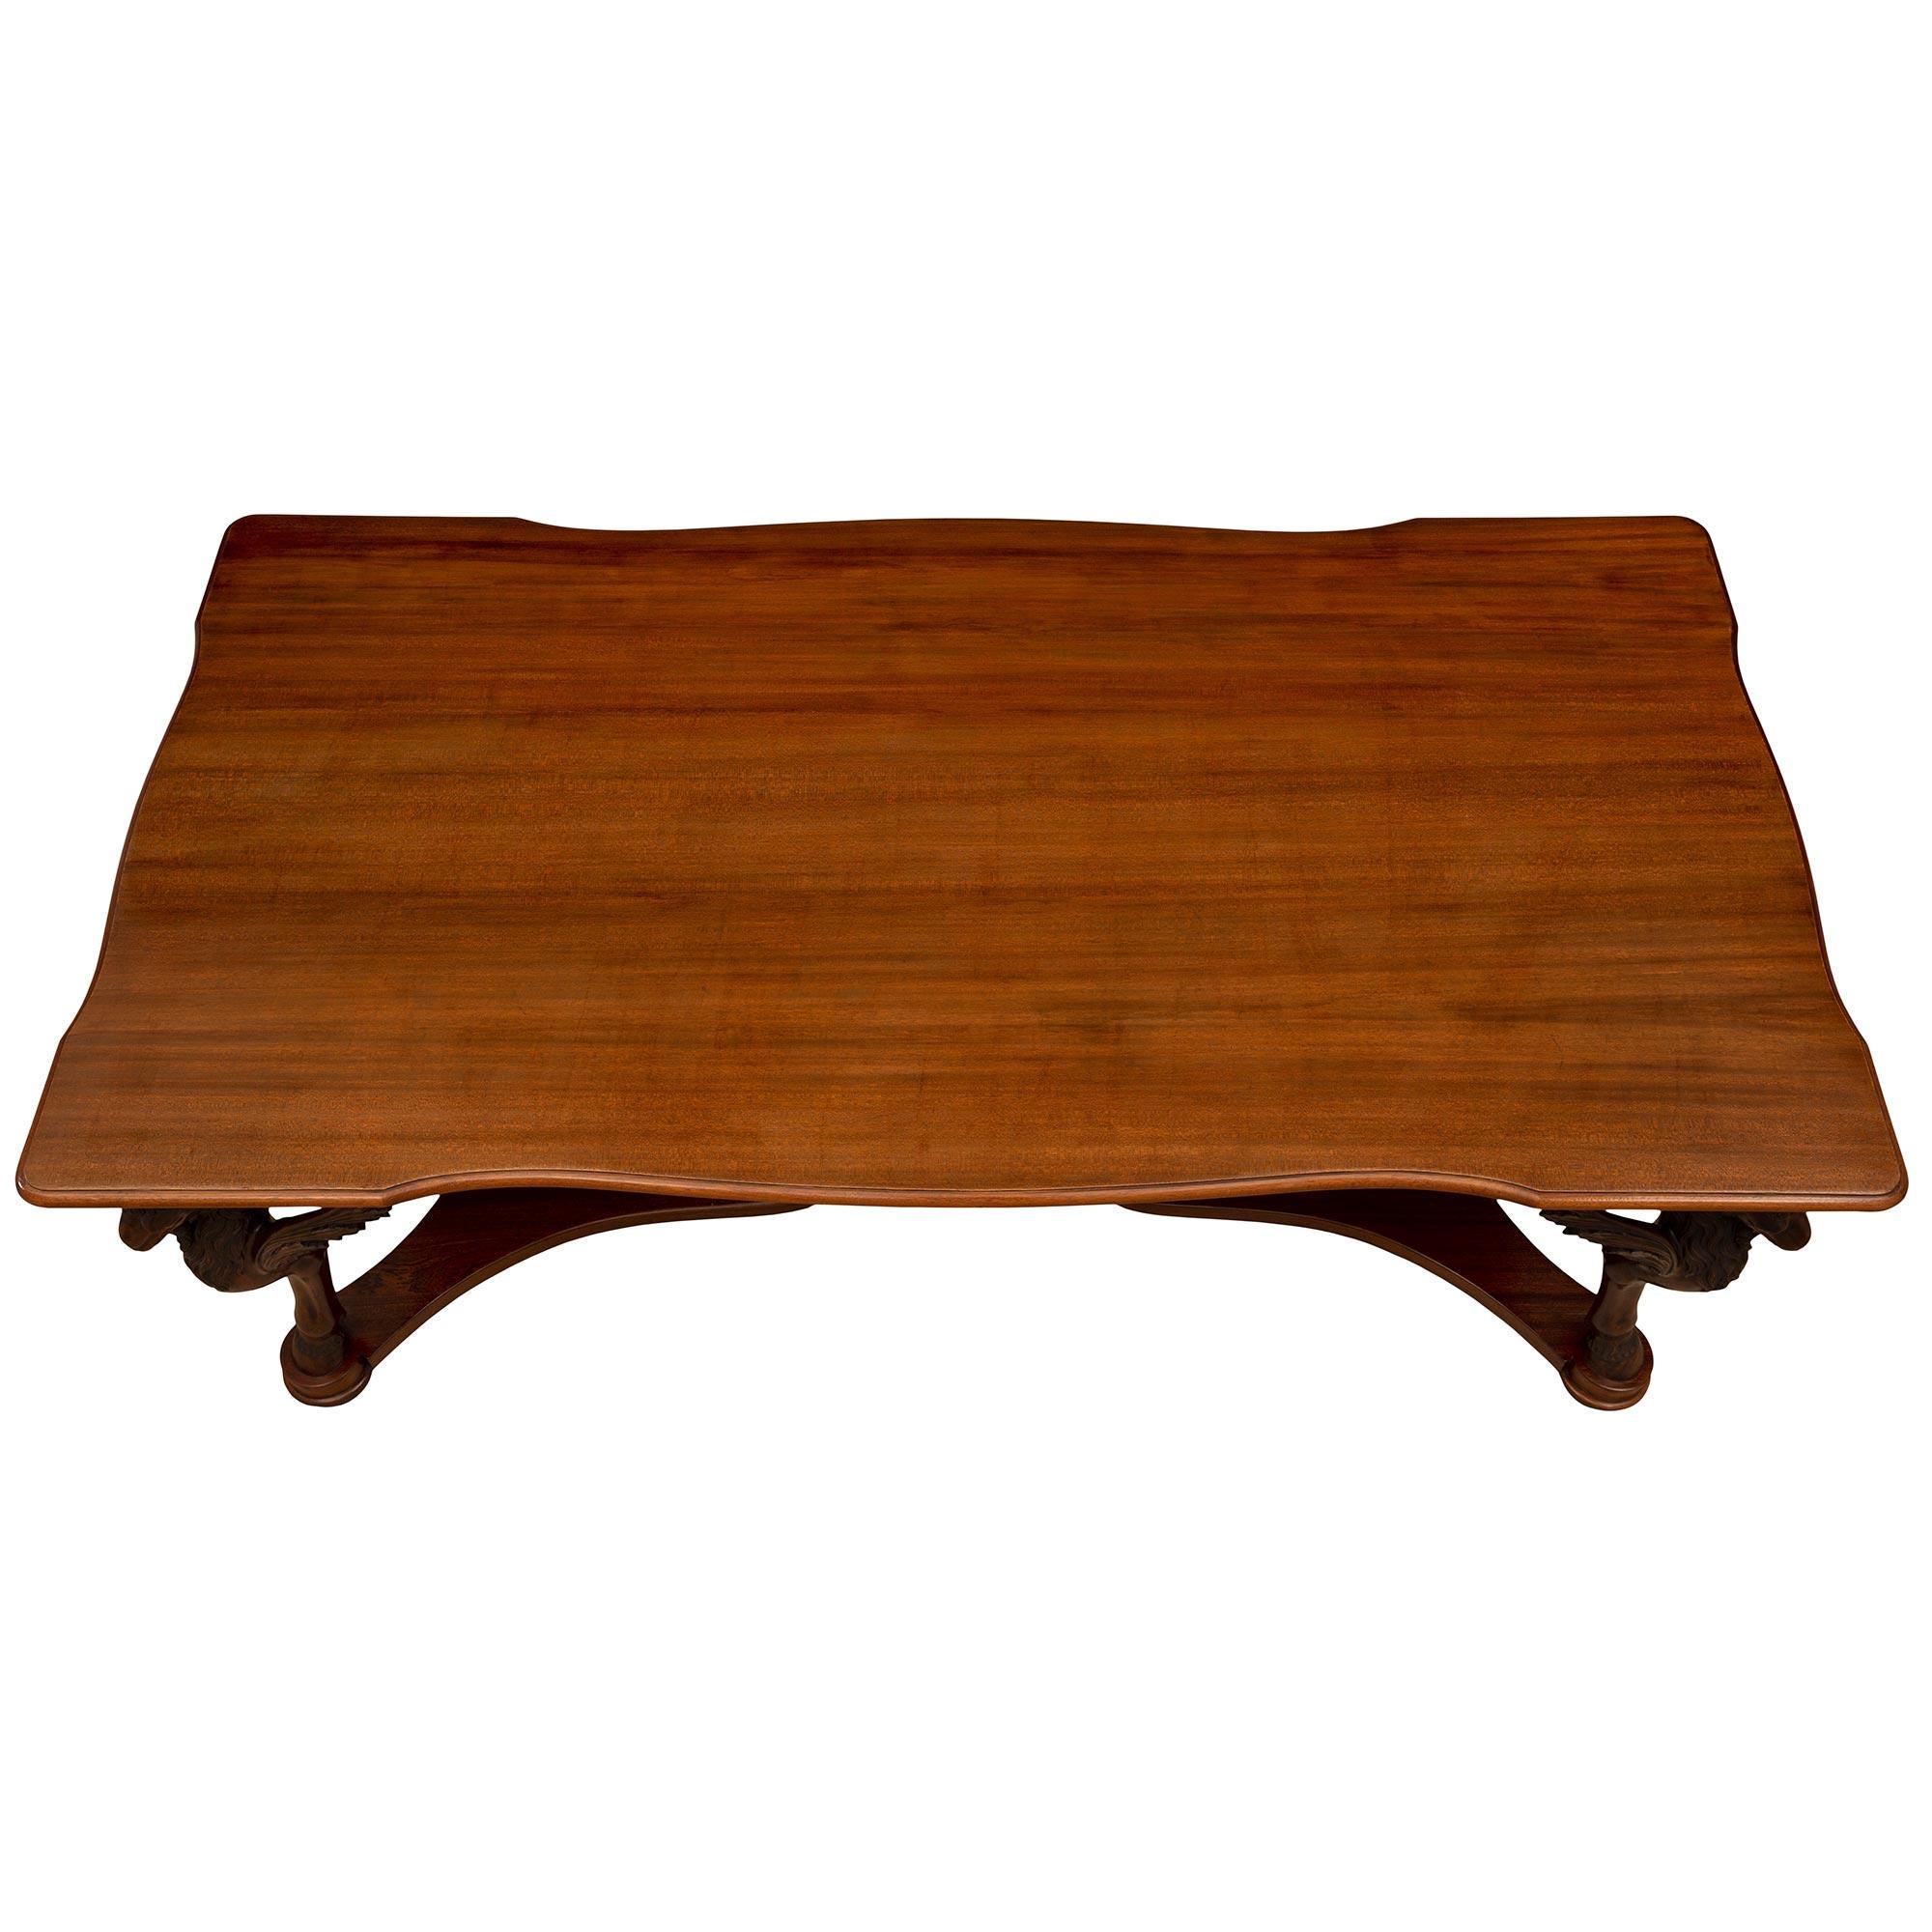 A handsome and most impressive Italian 19th century Neo-Classical st. Mahogany center table. The rectangular table is raised by elegant mottled bun feet below stunning supports in the shape of rams legs with hoof feet and richly carved open winged